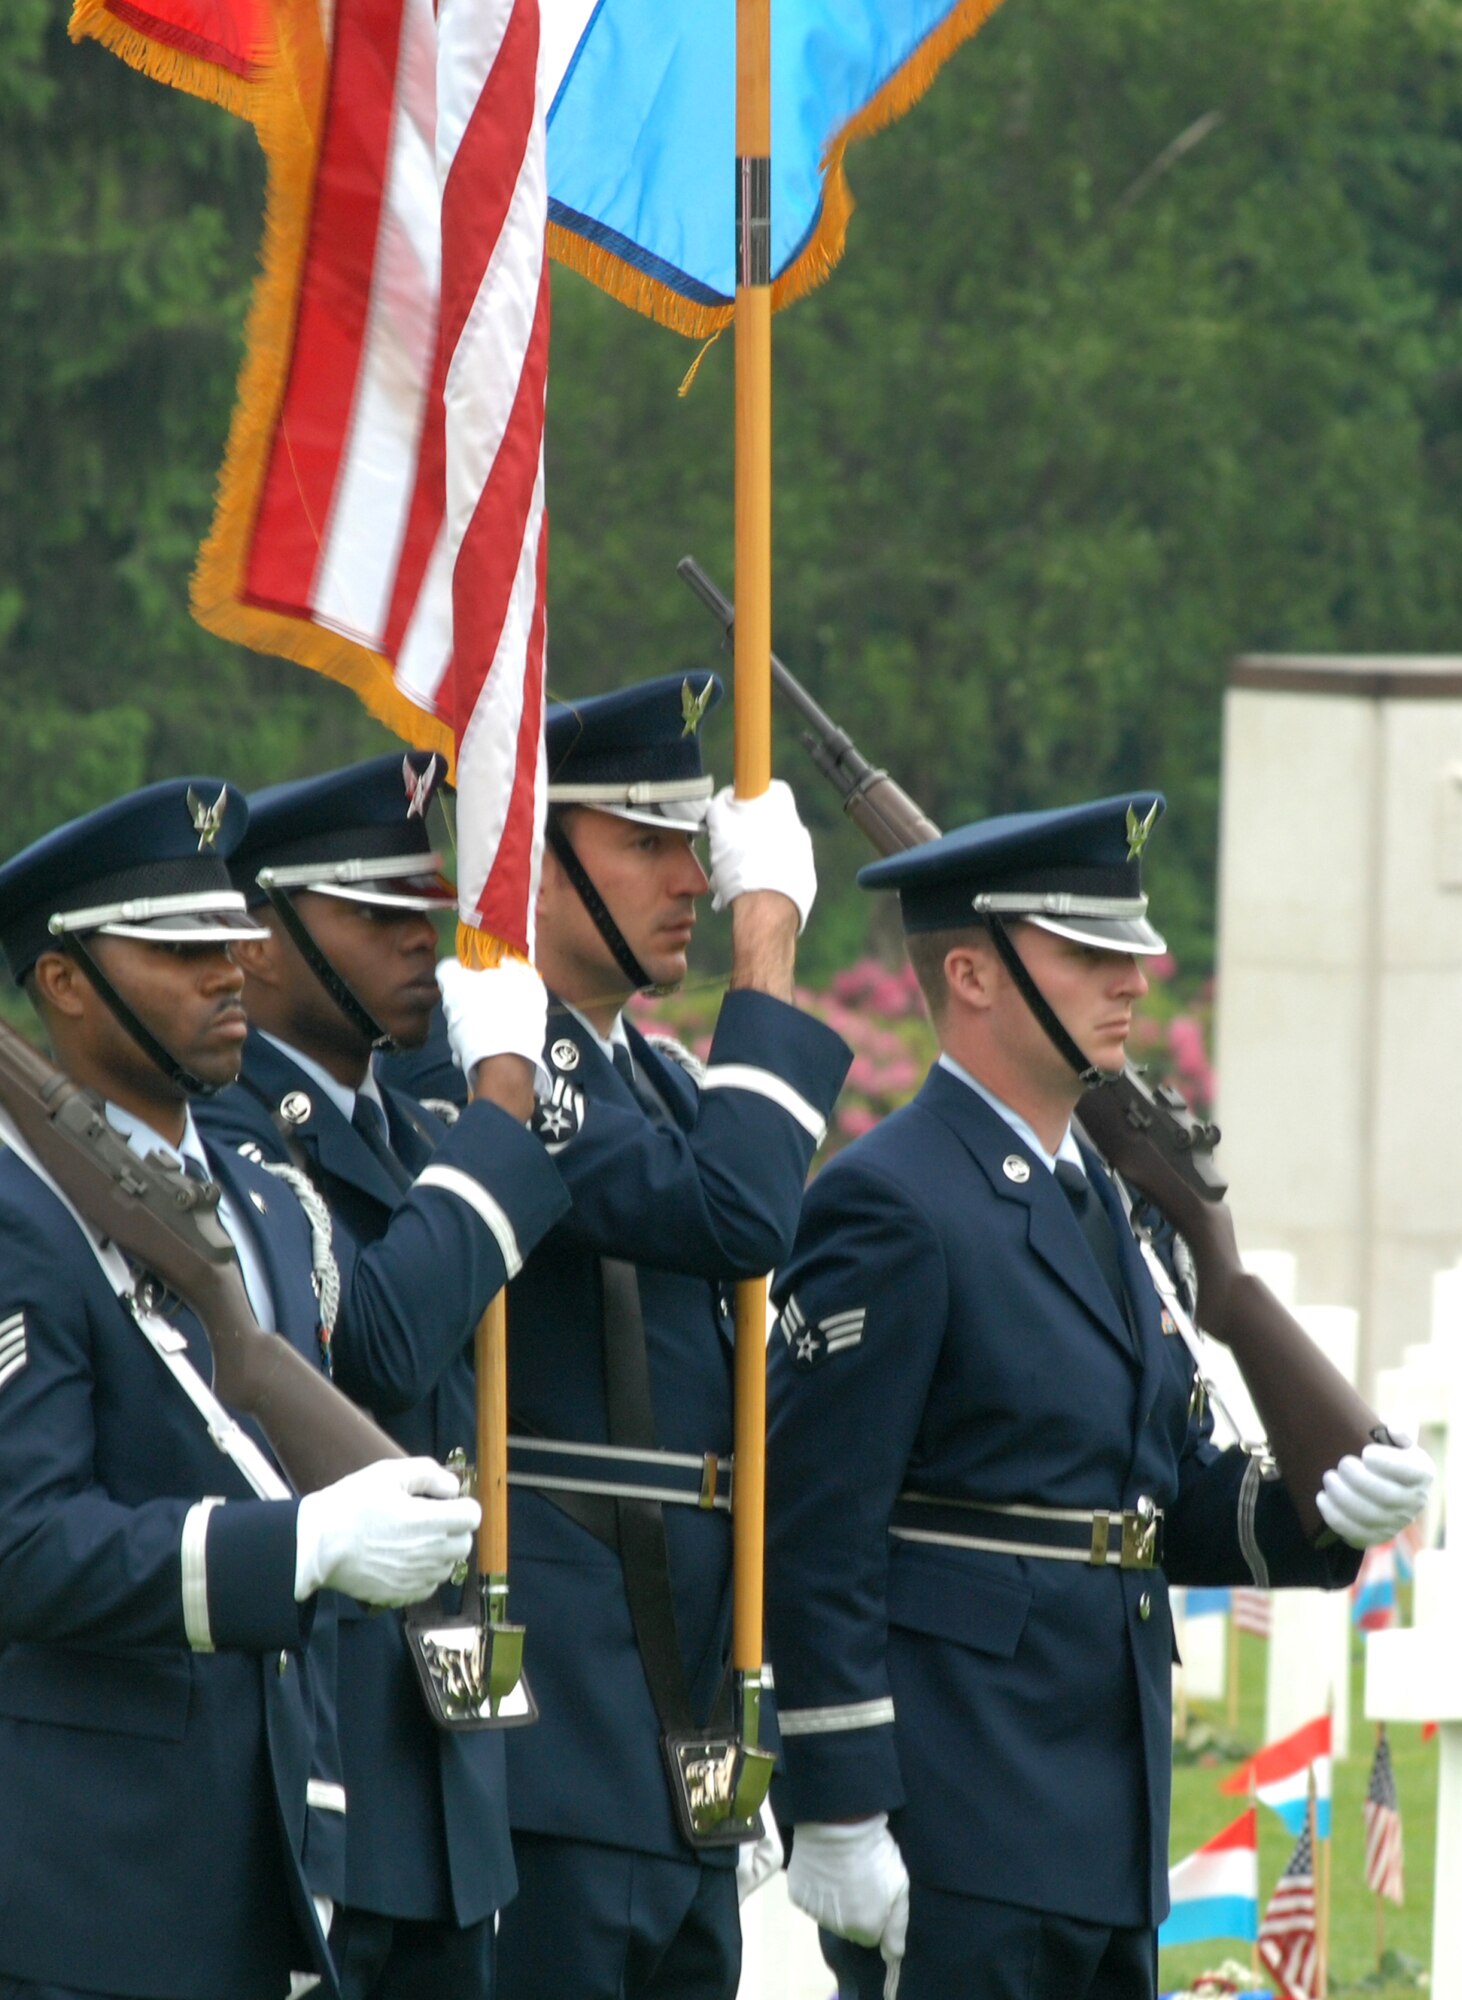 LUXEMBOURG CITY, Luxembourg – Airmen of the 52nd Fighter Wing Honor Guard present the colors during a Memorial Day ceremony at the Luxembourg American Cemetery and Memorial May 24, 2008. Memorial Day was officially proclaimed in 1868 and became widespread by 1902. It was named a federal holiday in 1971. (U.S. Air Force photo by Staff Sgt. Logan Tuttle)